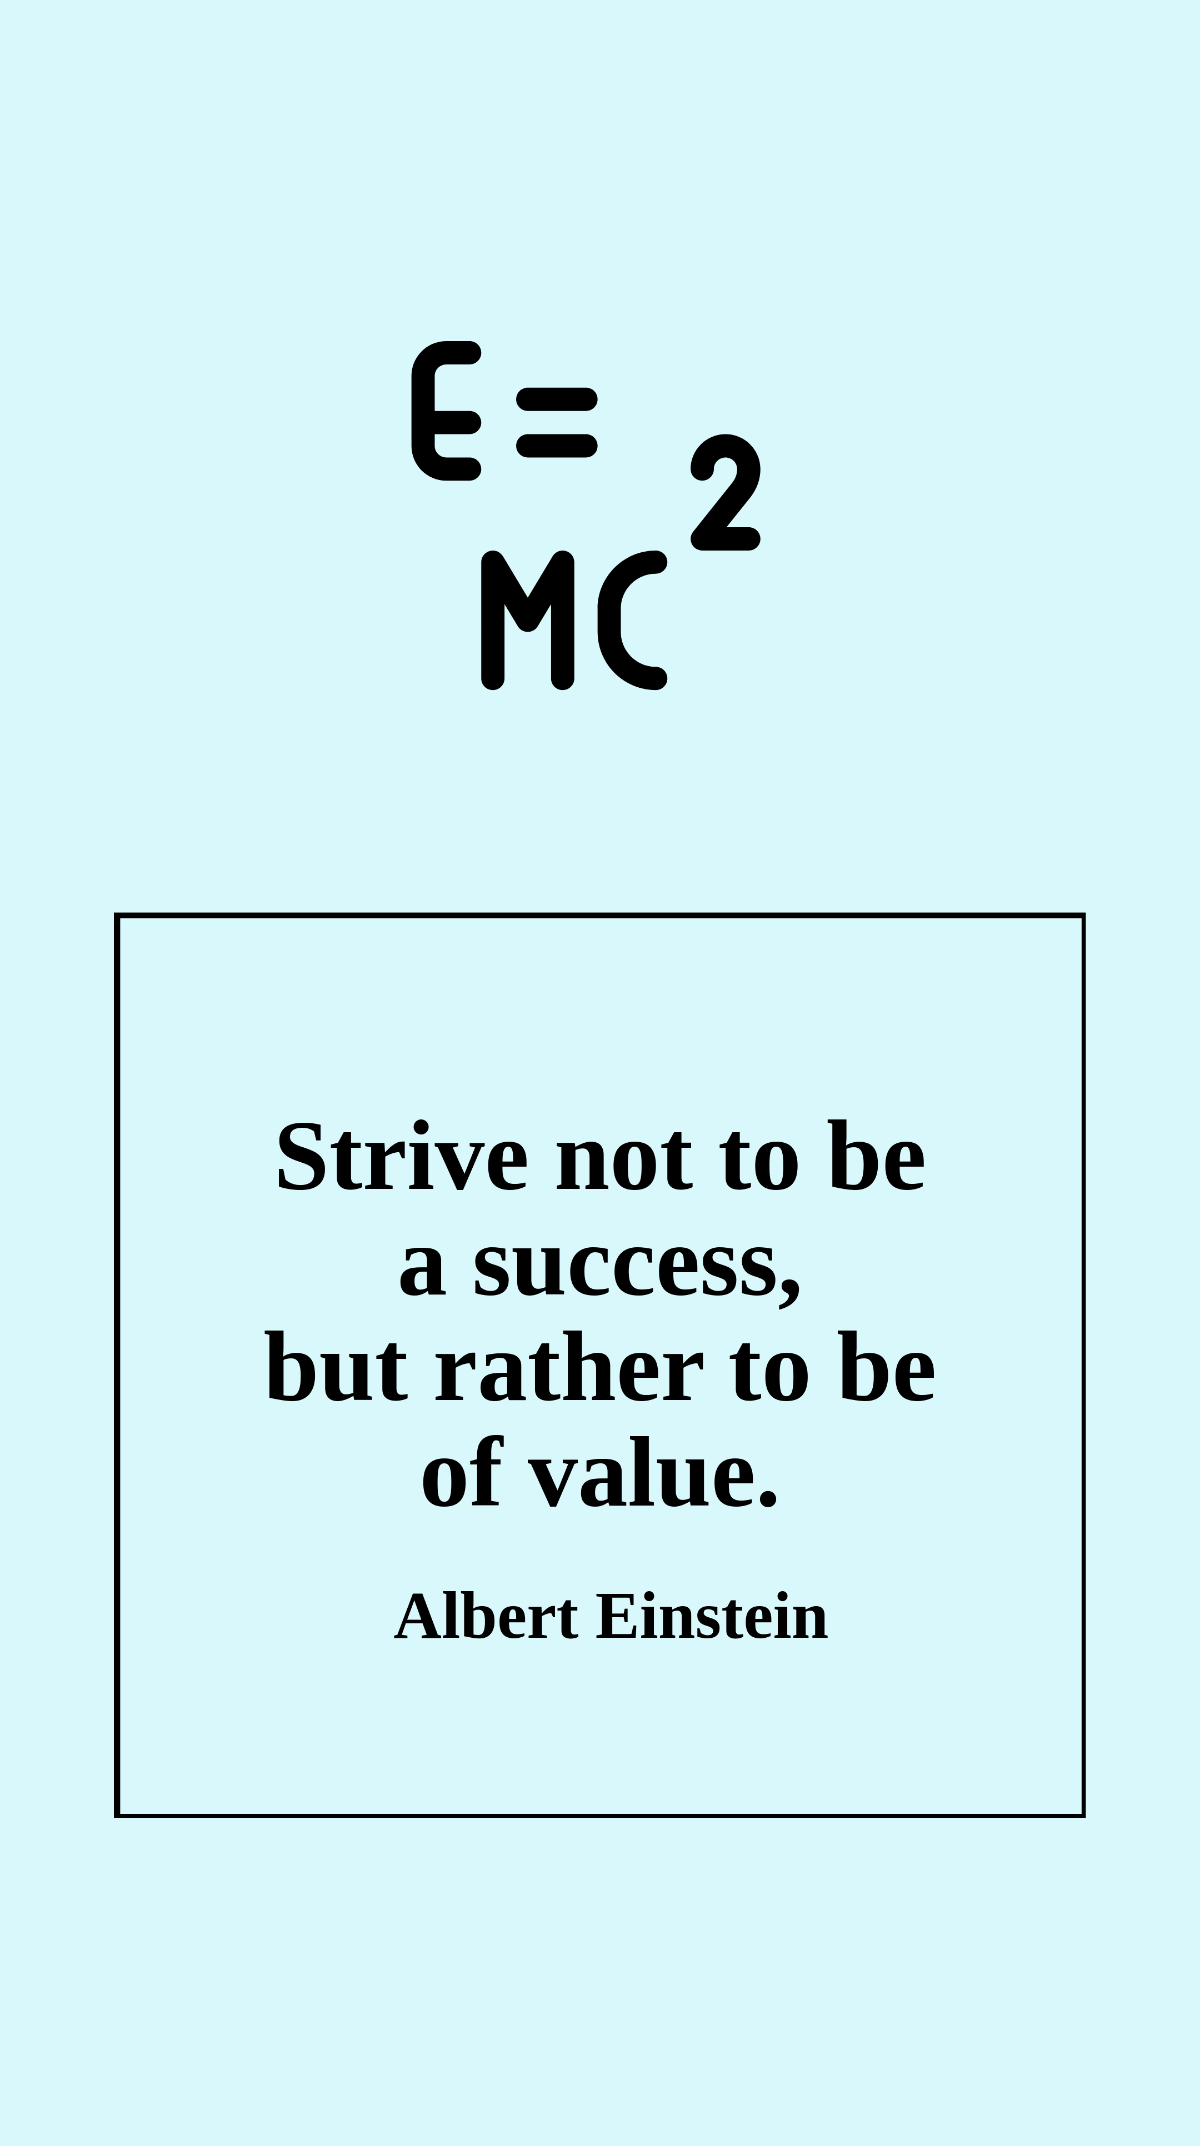 Albert Einstein - Strive not to be a success, but rather to be of value. Template